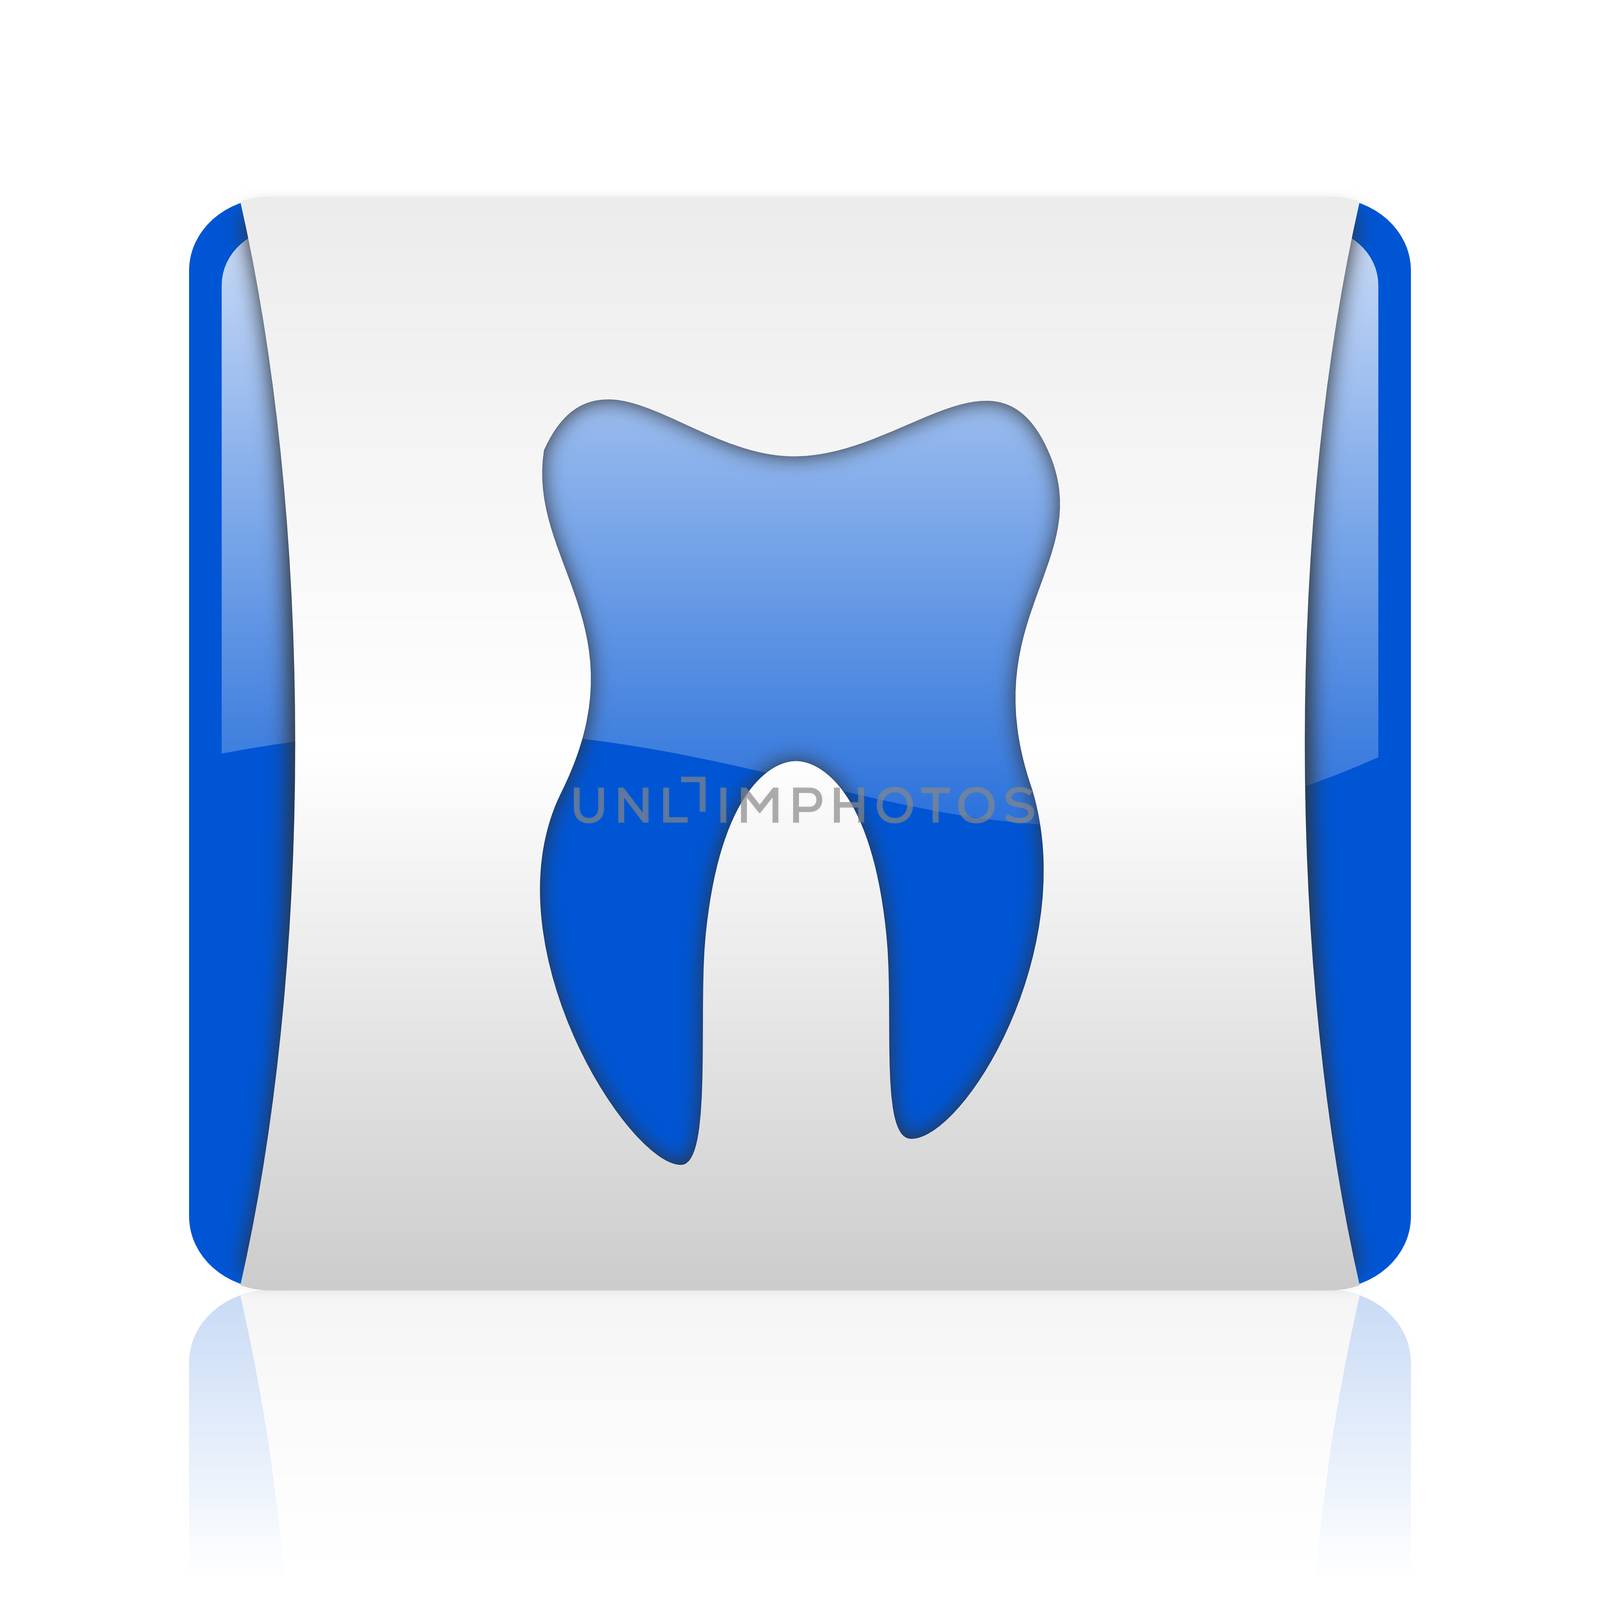 tooth blue square web glossy icon